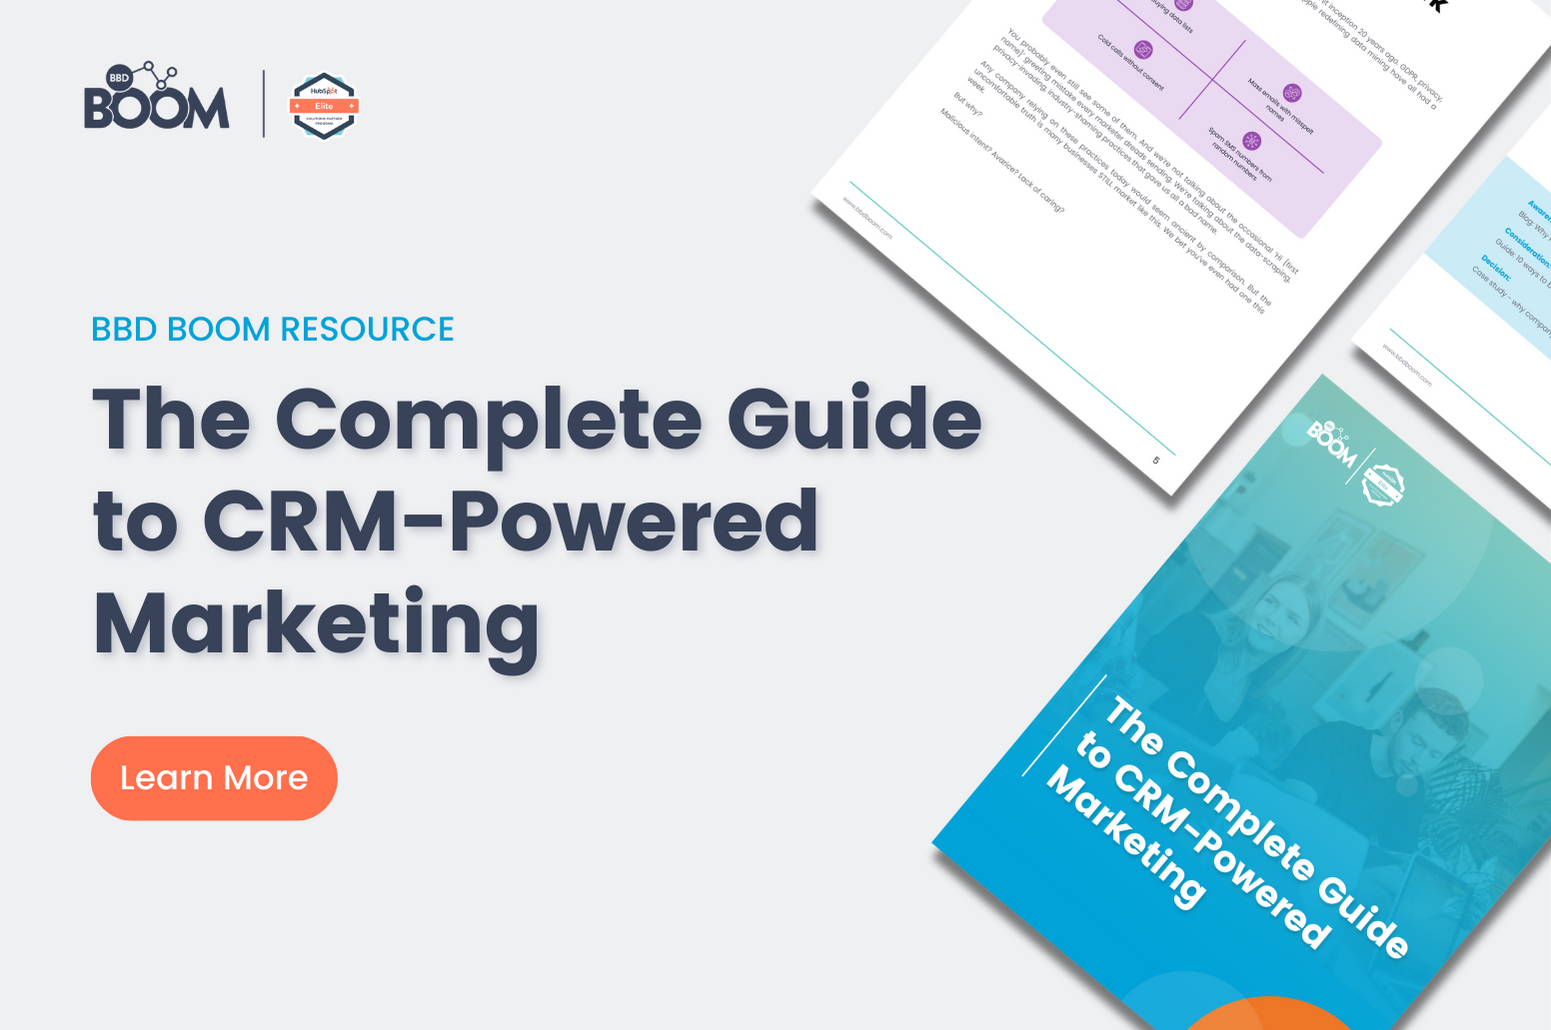 The Complete Guide to CRM-Powered Marketing